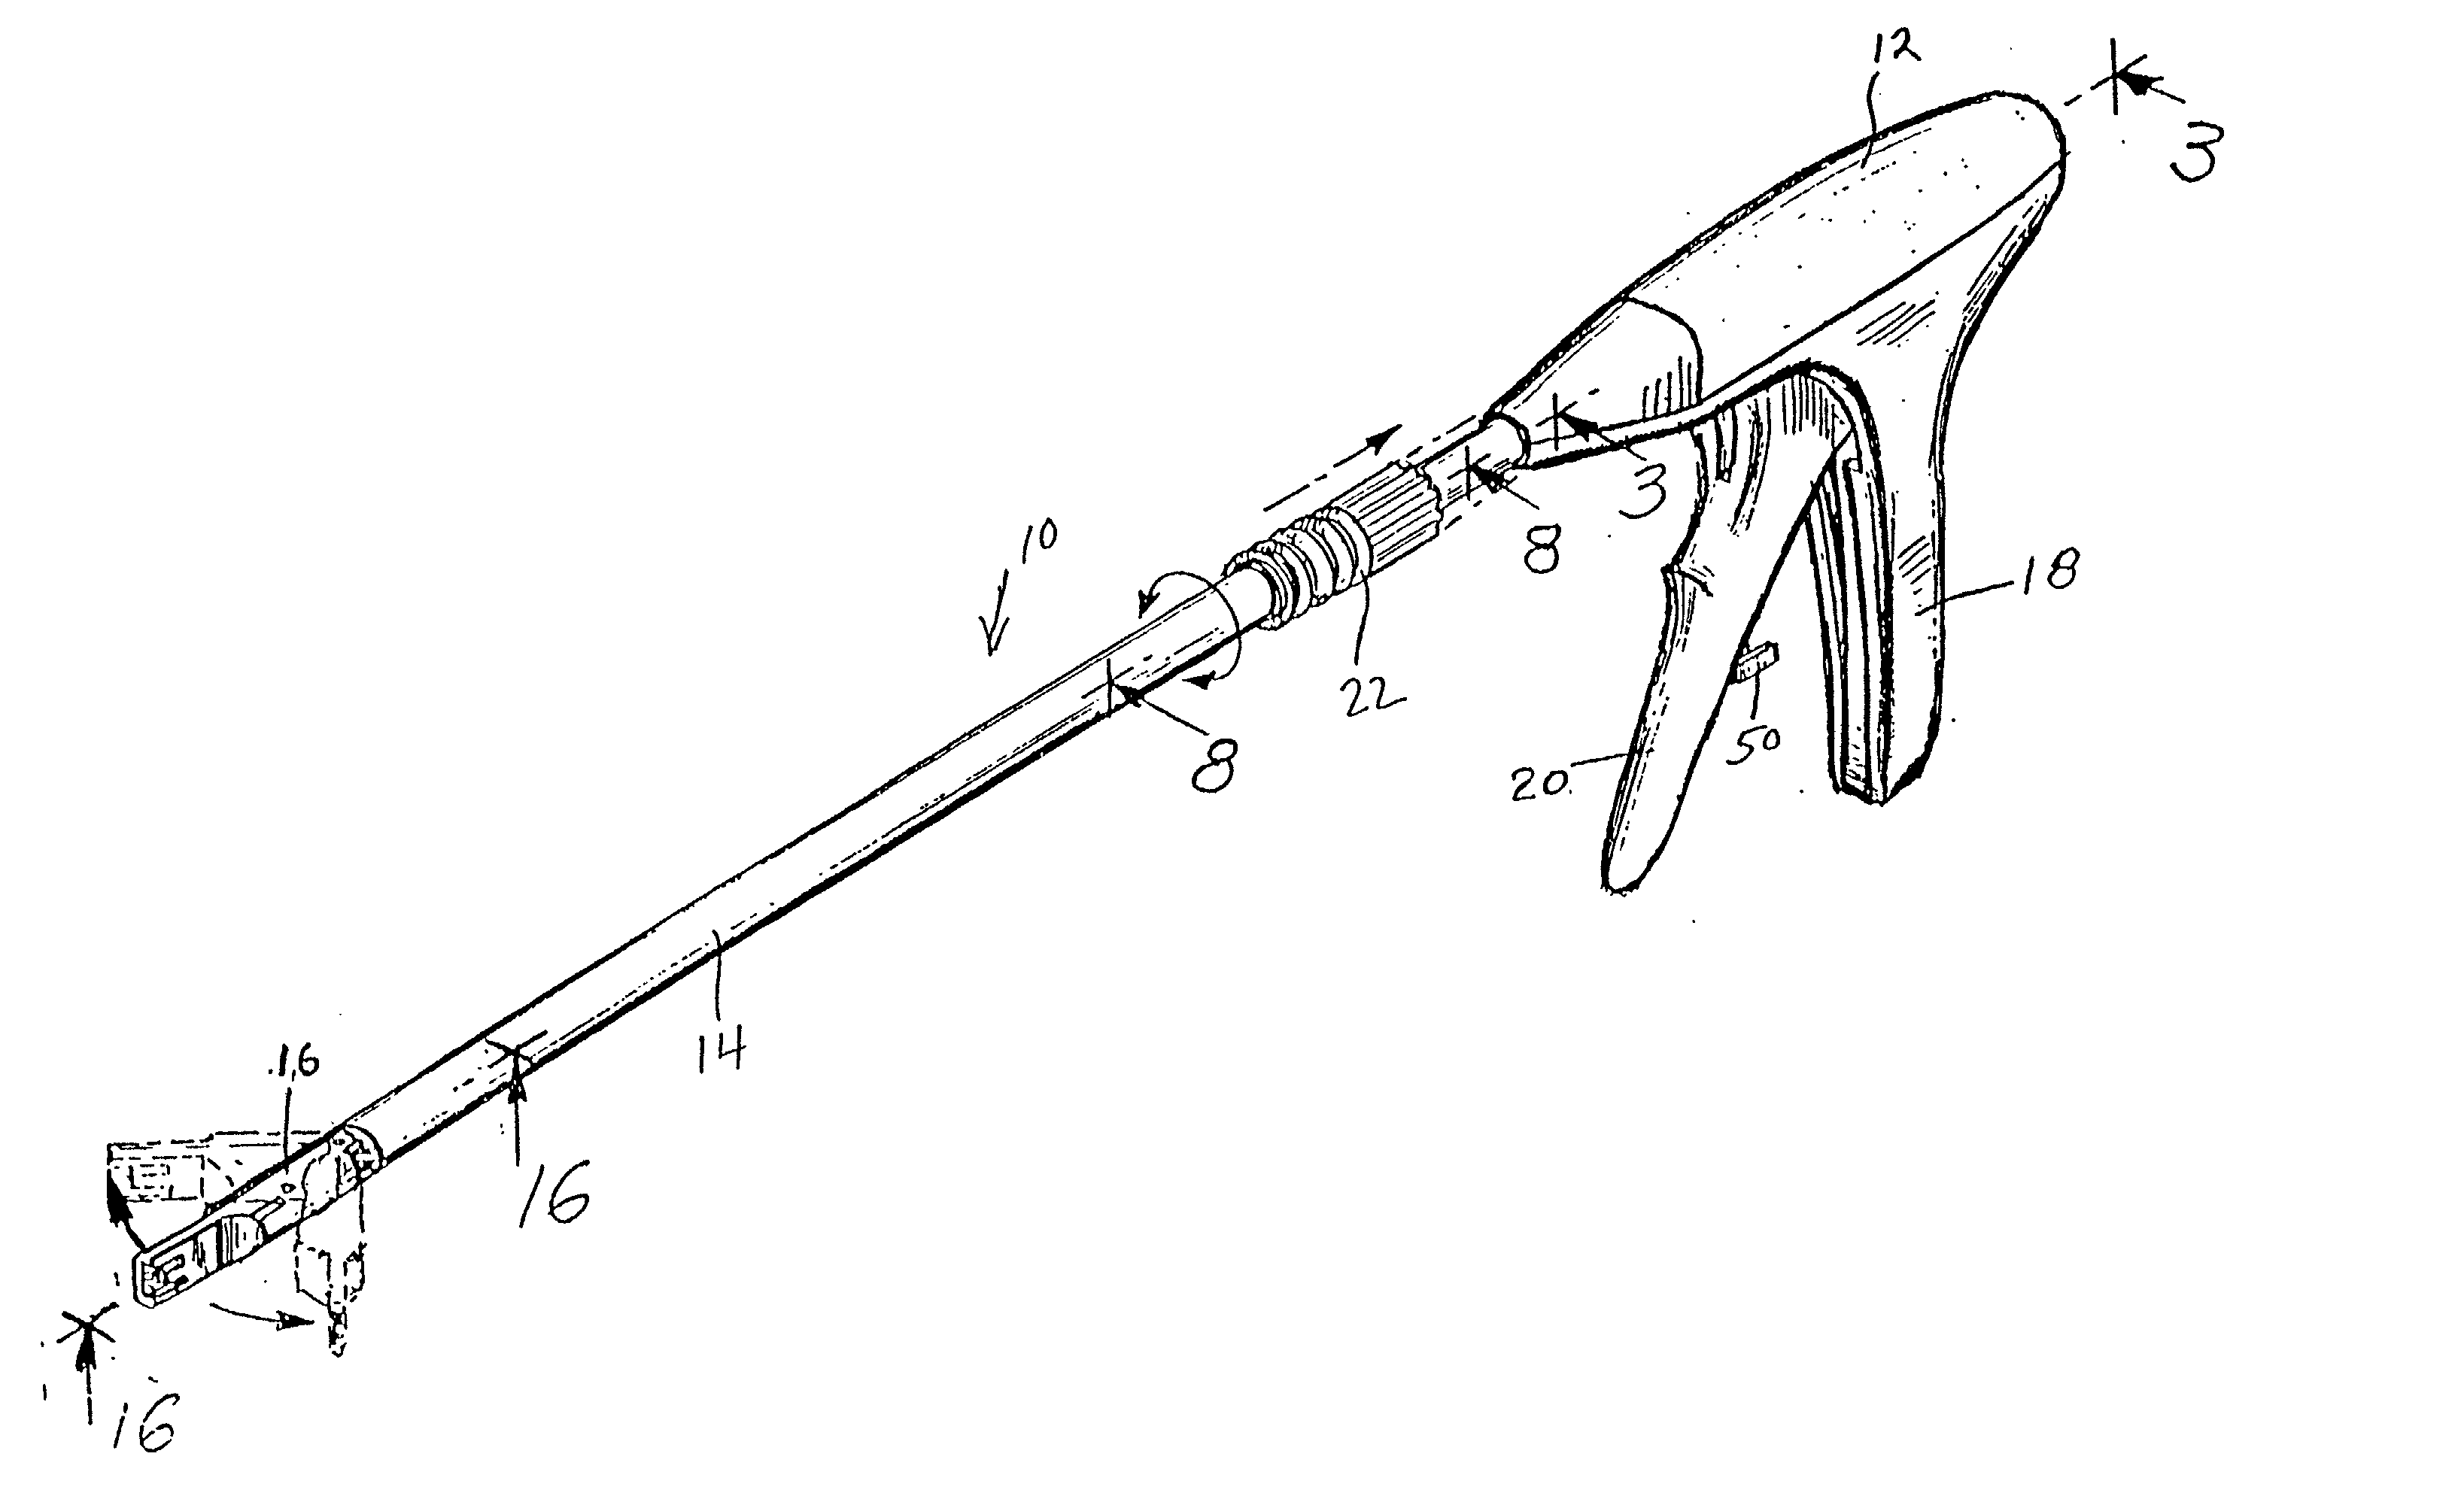 Apparatus and method for applying surgical staples to attach an object to body tissue